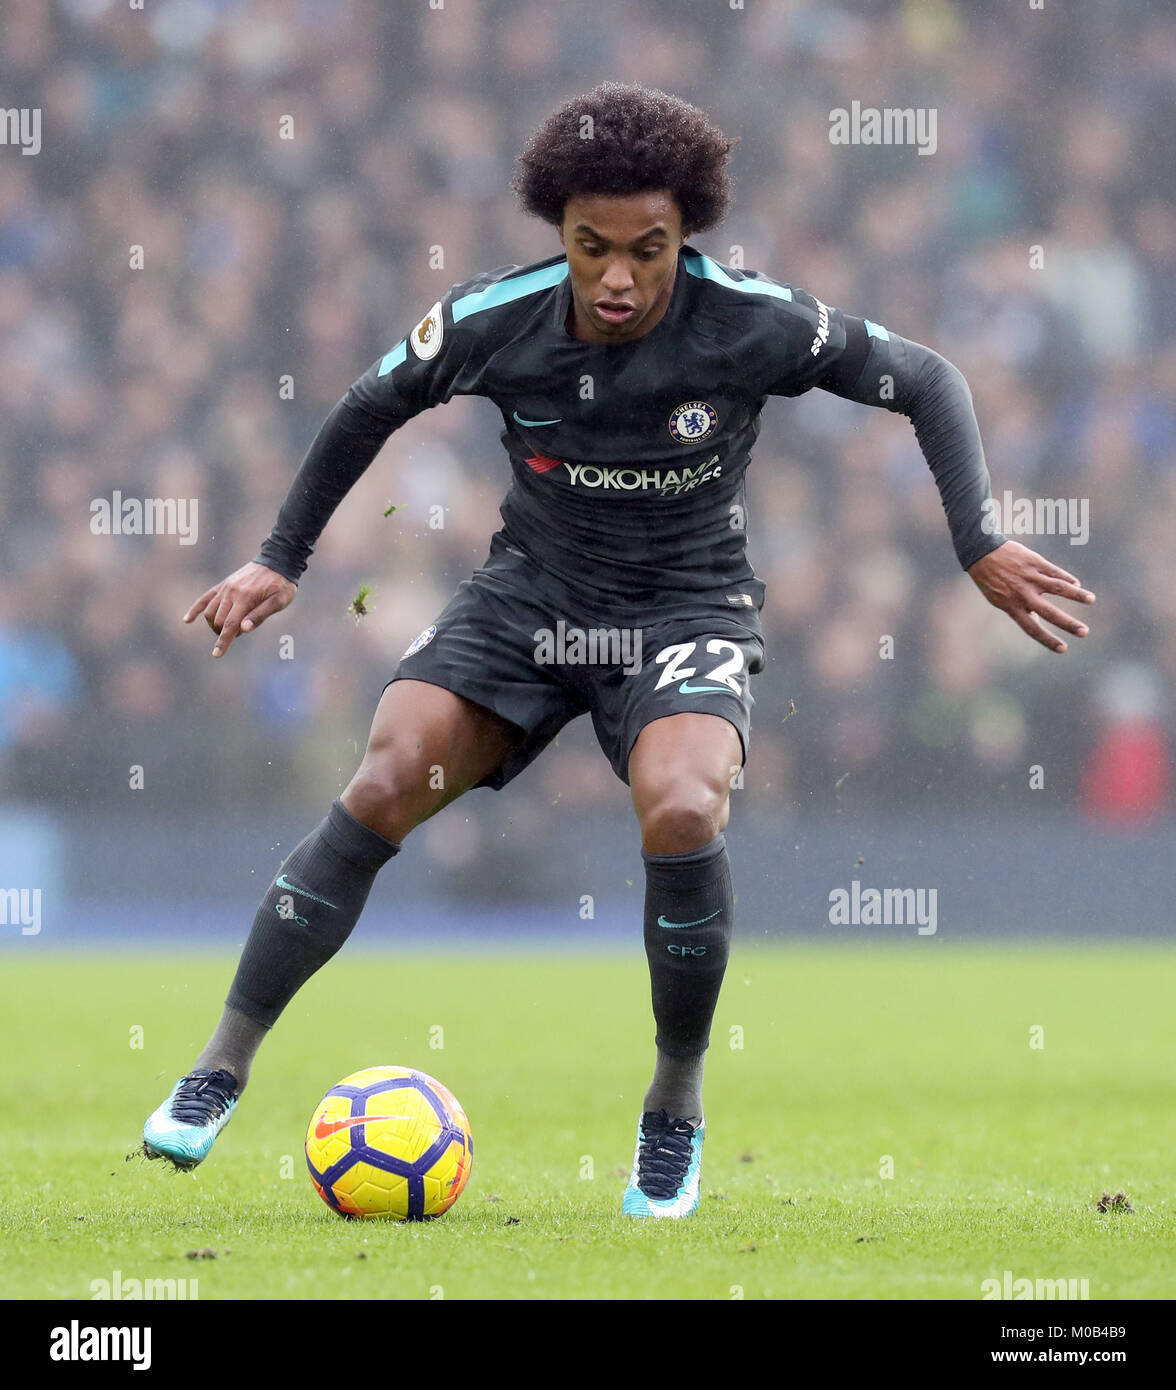 Chelsea's Willian during the Premier League match at the AMEX Stadium, Brighton. PRESS ASSOCIATION Photo. Picture date: Saturday January 20, 2018. See PA story SOCCER Brighton. Photo credit should read: Gareth Fuller/PA Wire. RESTRICTIONS: No use with unauthorised audio, video, data, fixture lists, club/league logos or 'live' services. Online in-match use limited to 75 images, no video emulation. No use in betting, games or single club/league/player publications. Stock Photo